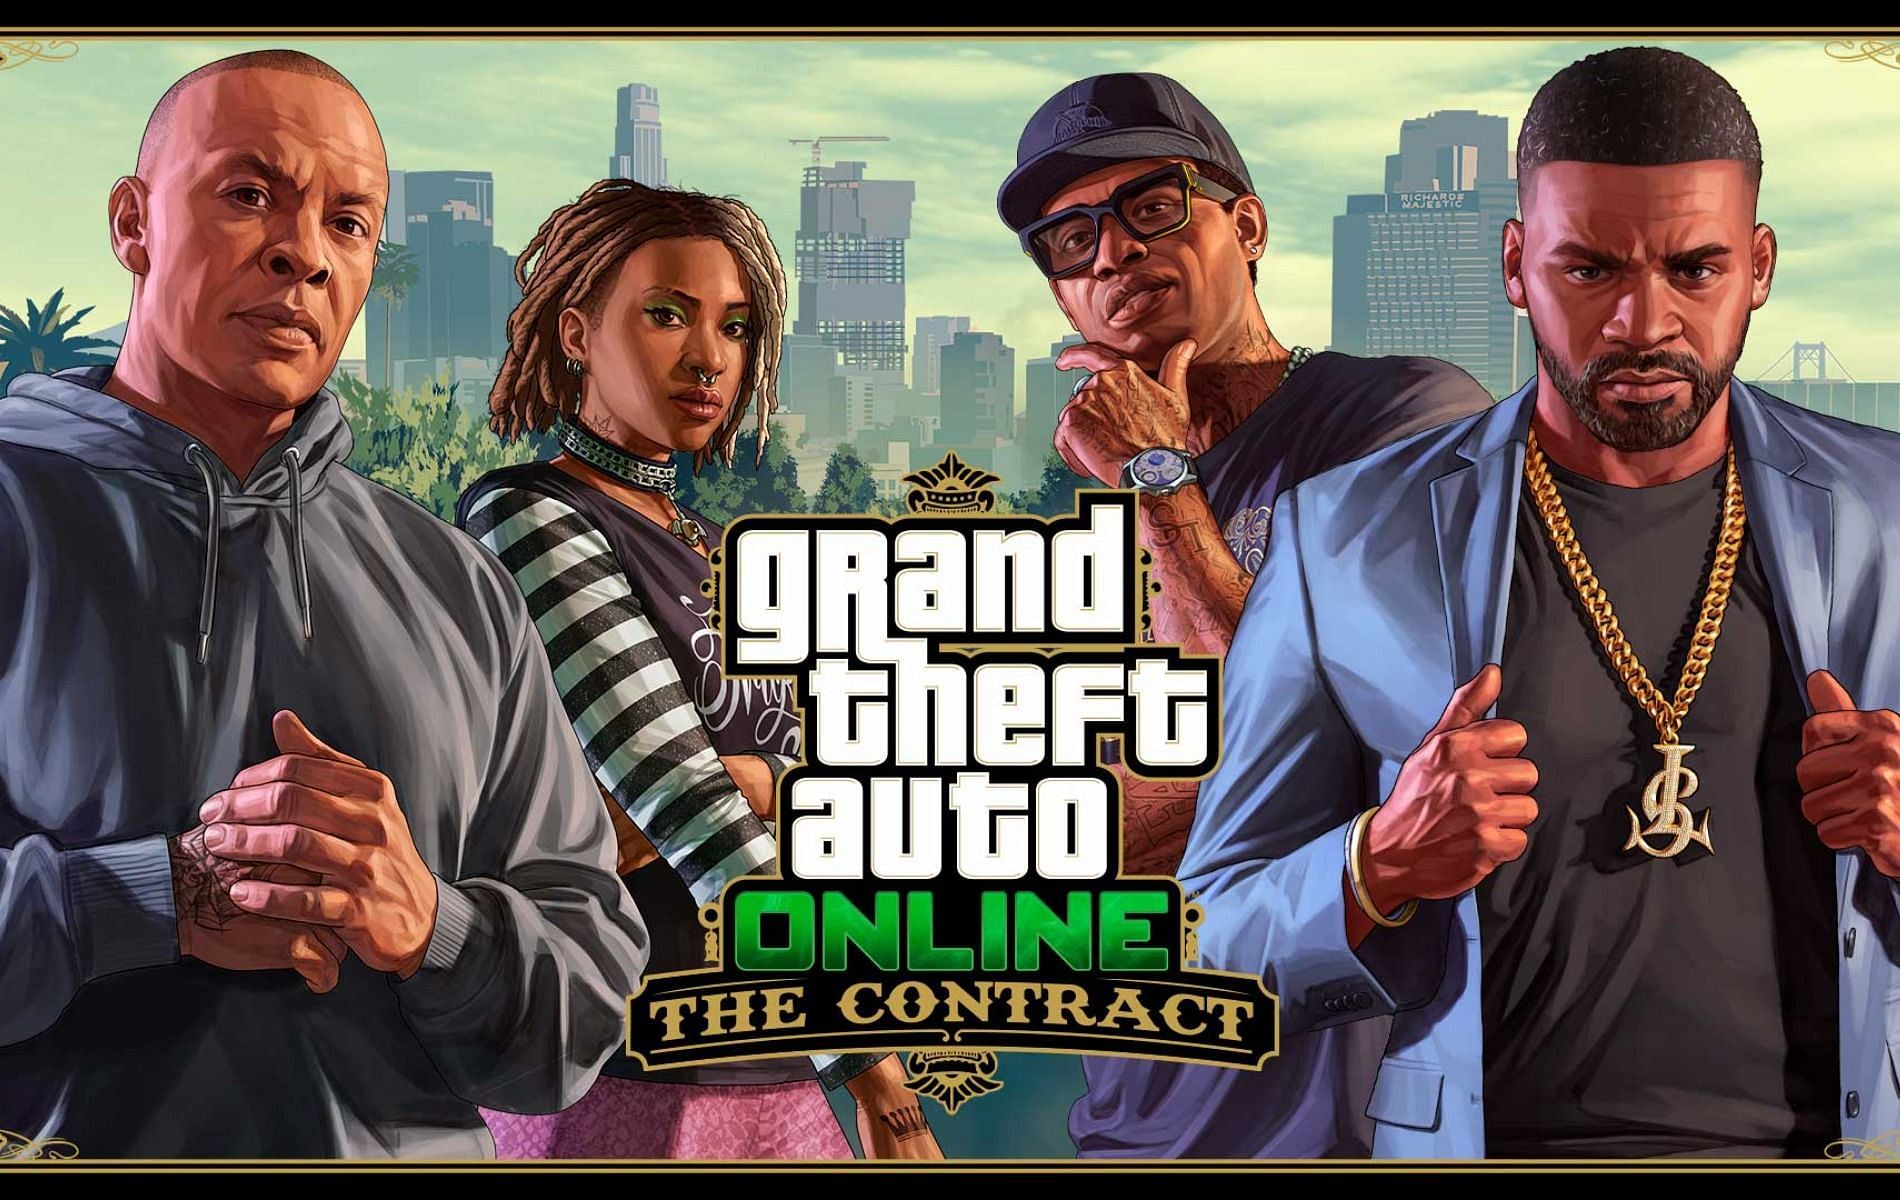 The Contract is the latest DLC to be added to GTA Online (Image via Rockstar Games)